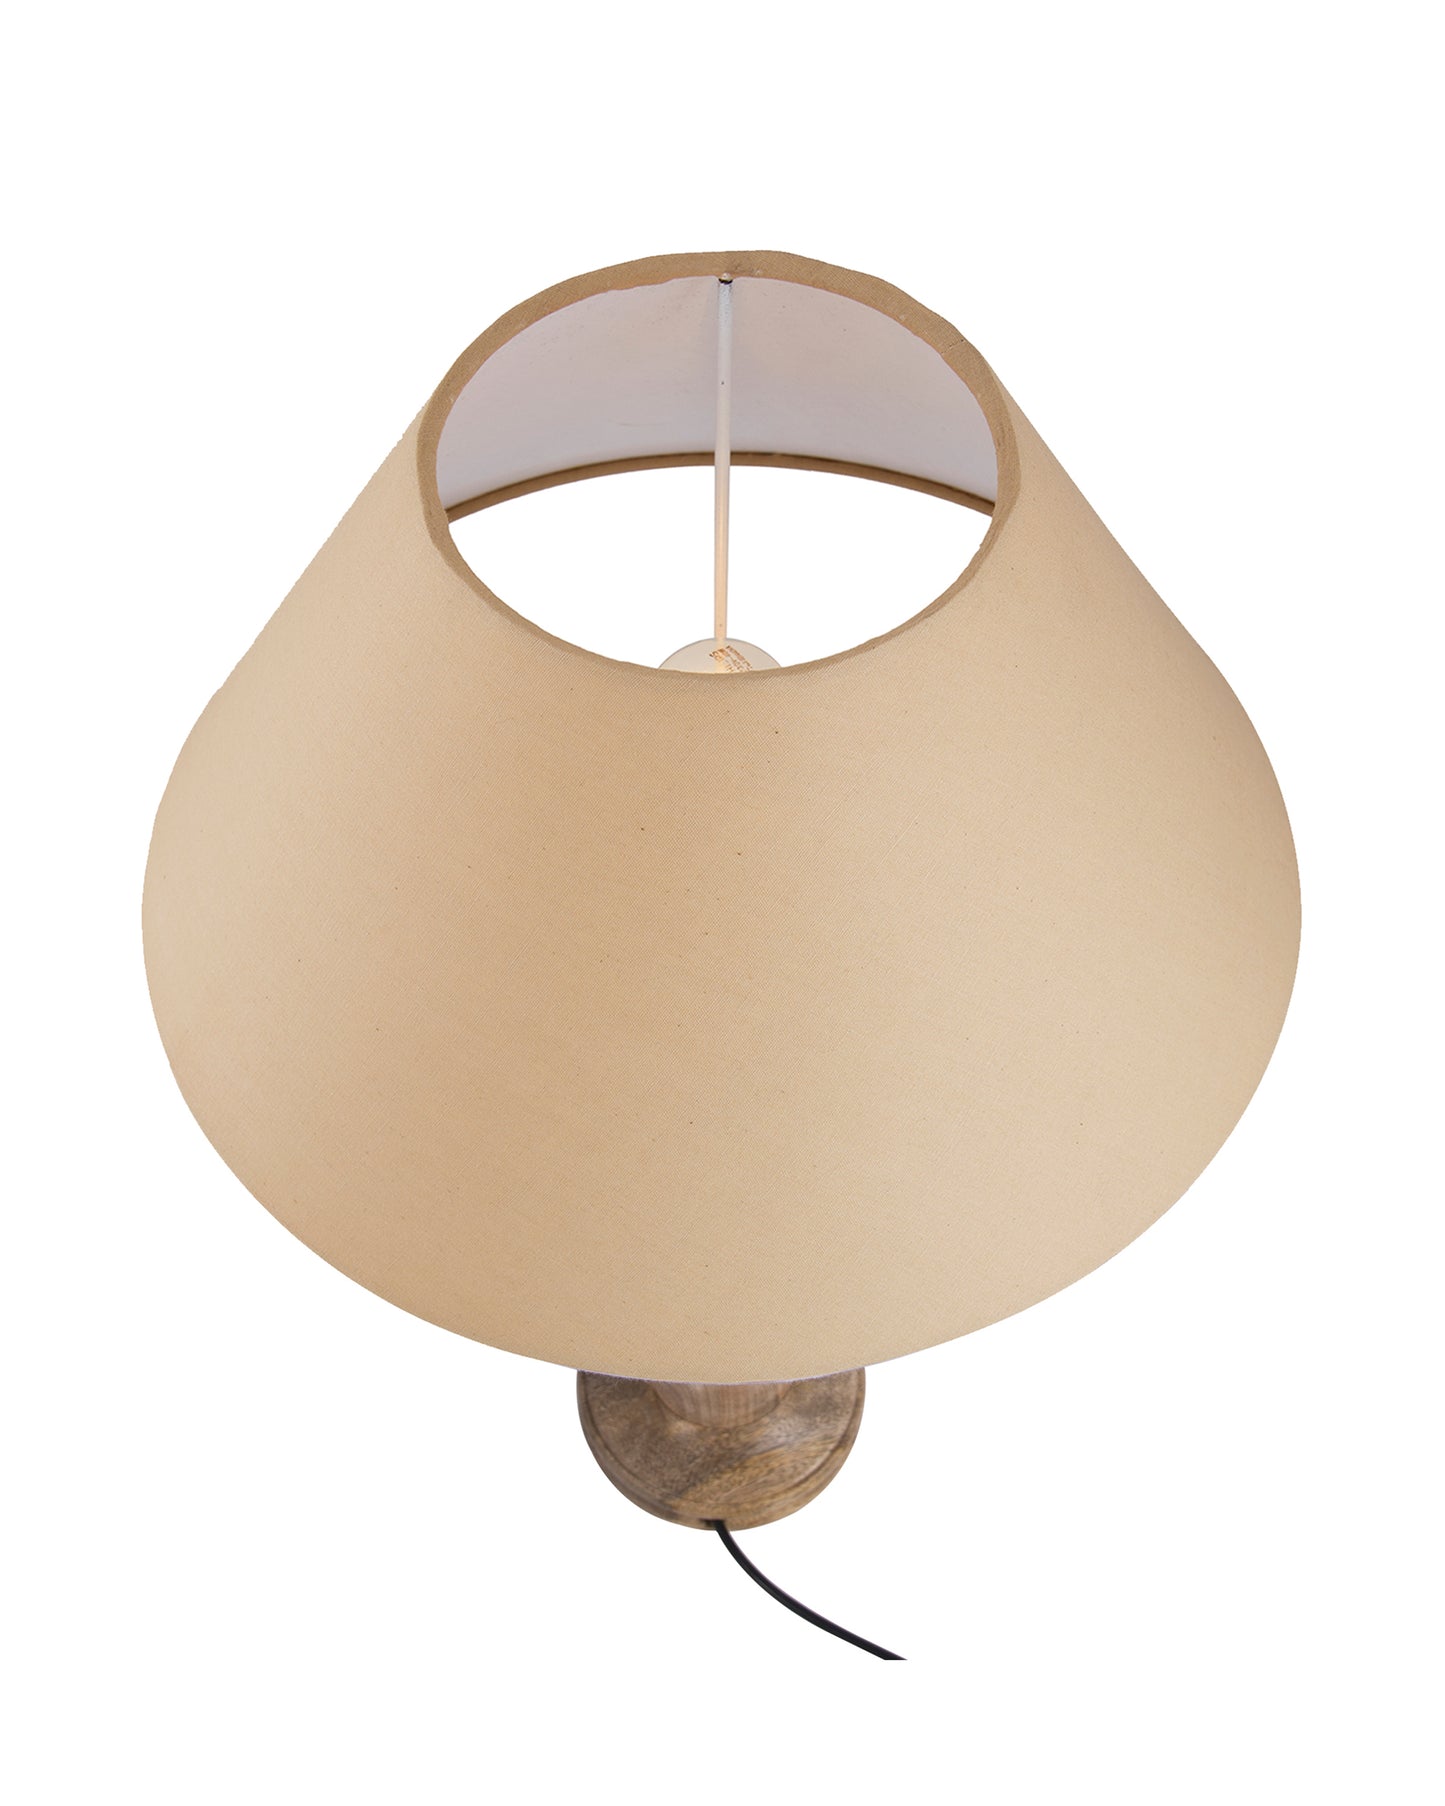 Mabel Rustic Wood Table Lamp with Shade